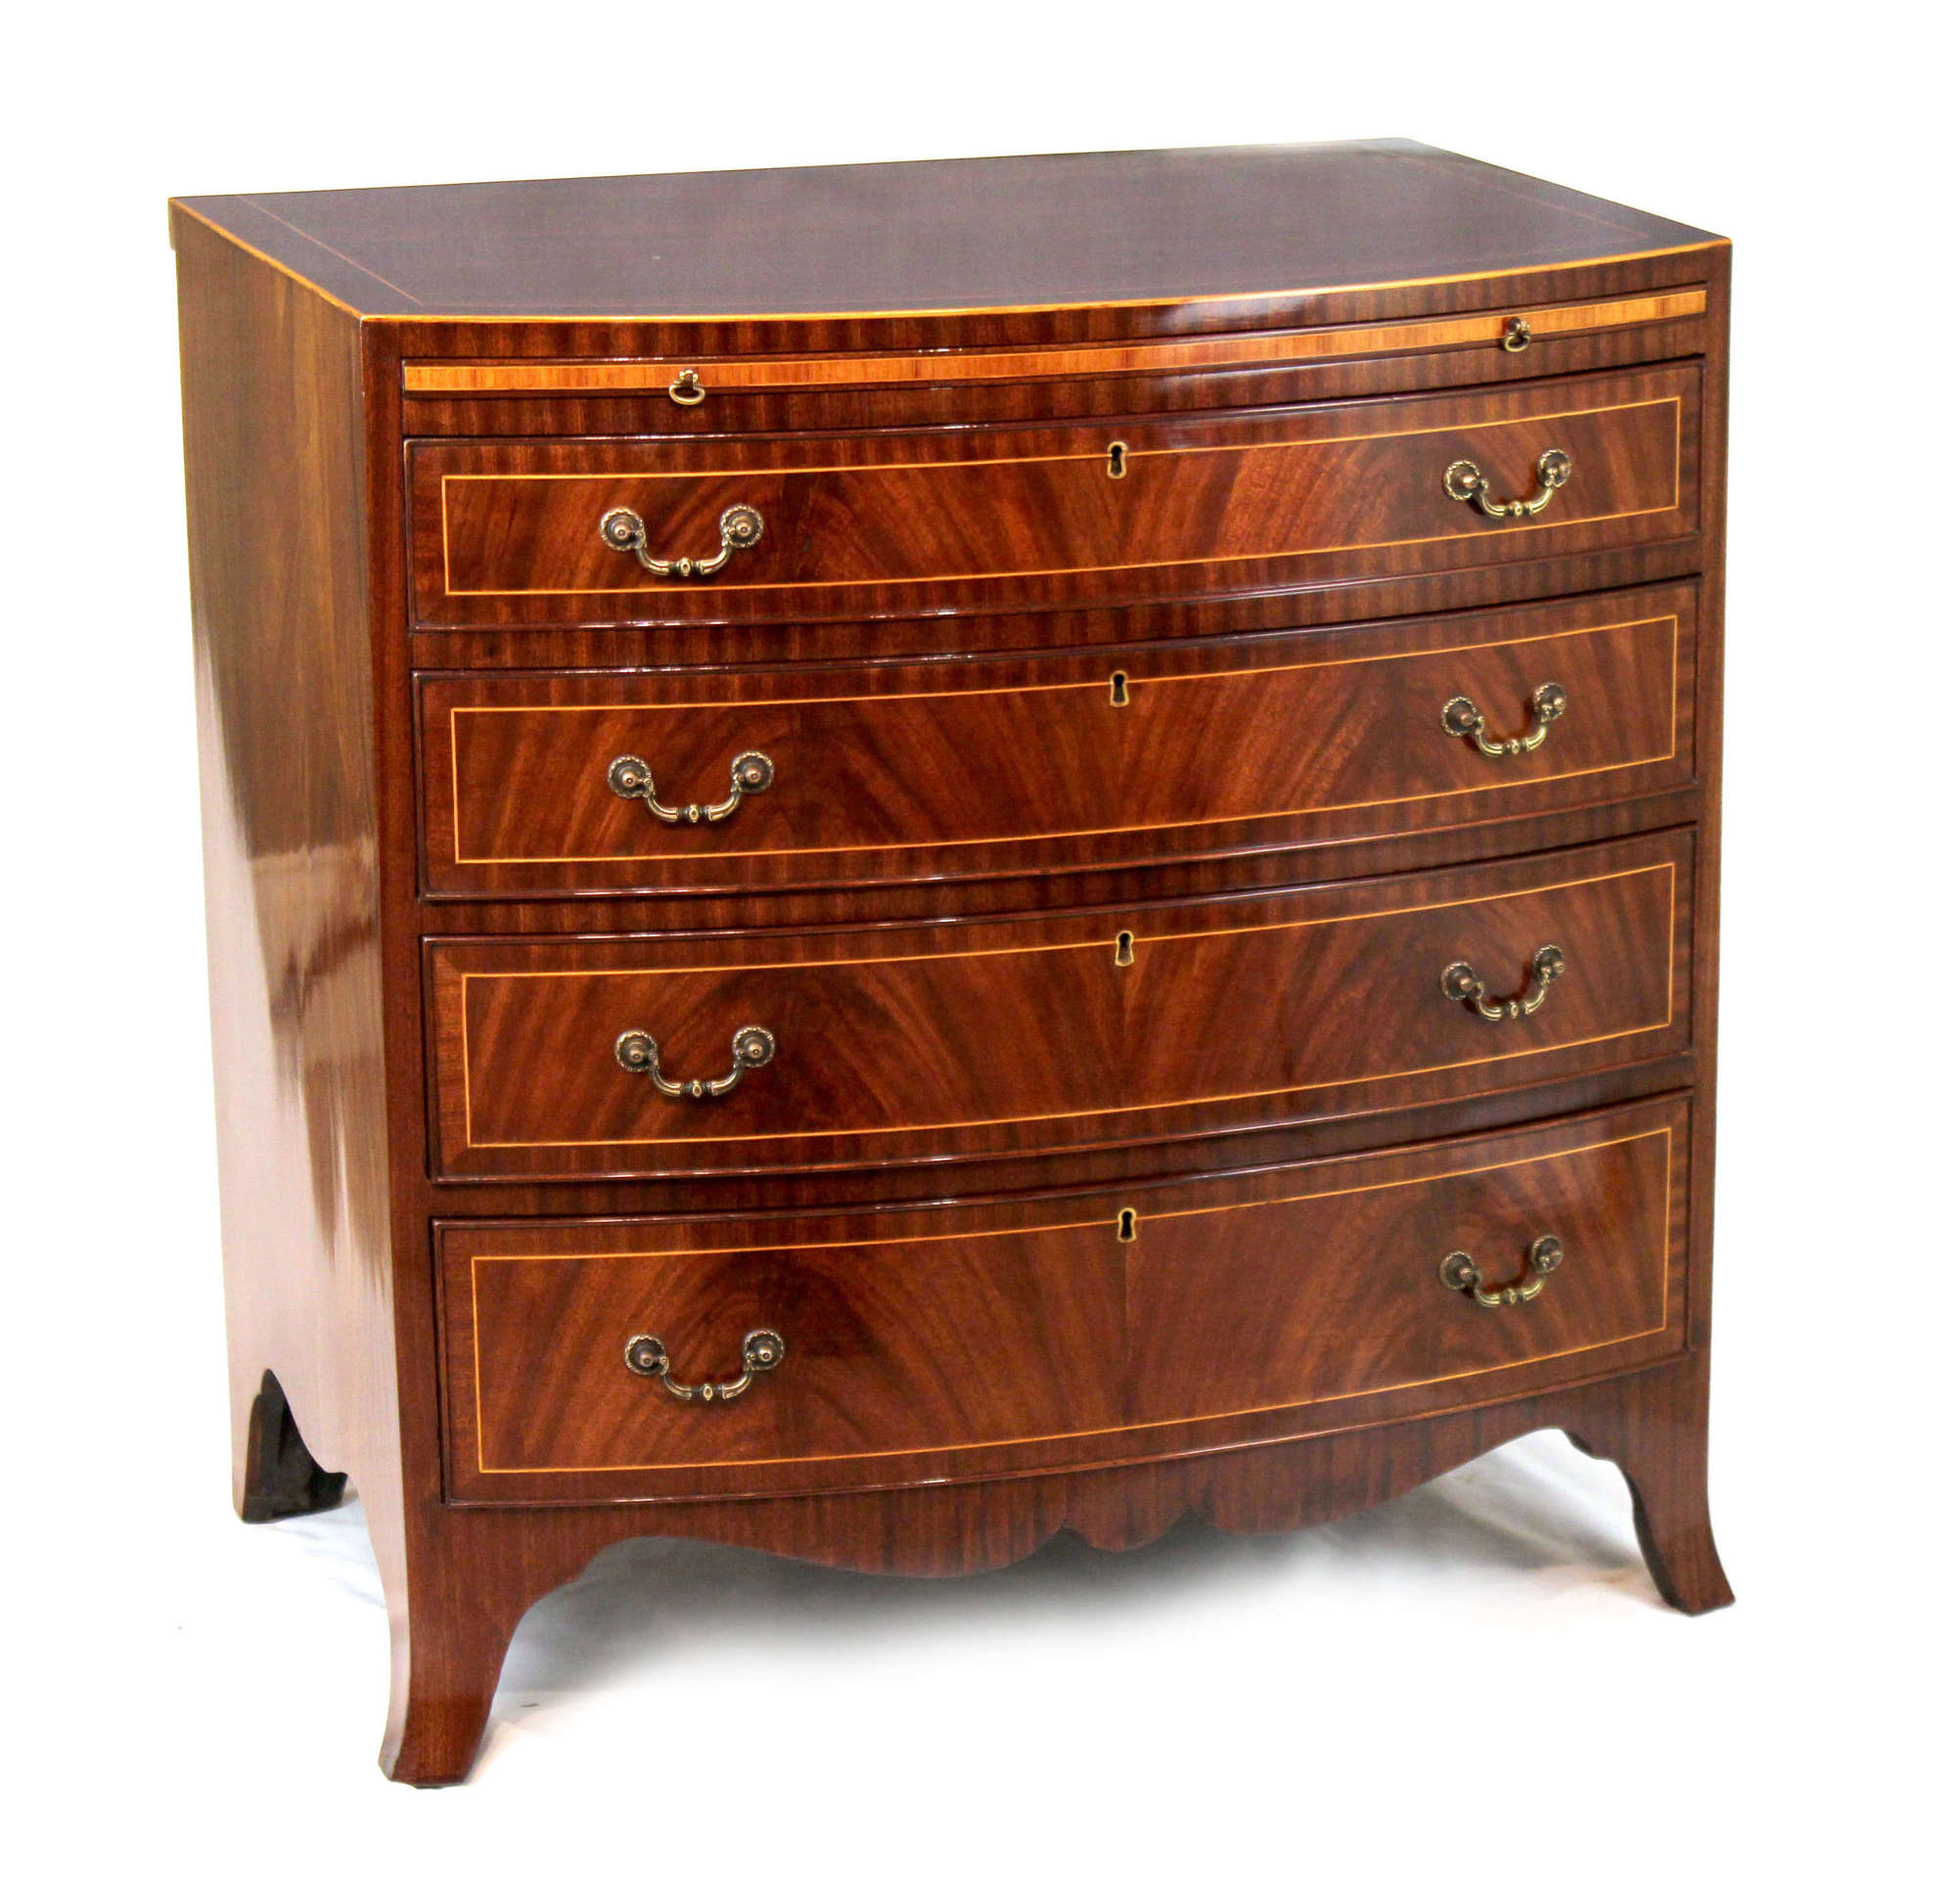 The Quality Edwardian Mahogany Inlaid Bow Fronted Chest